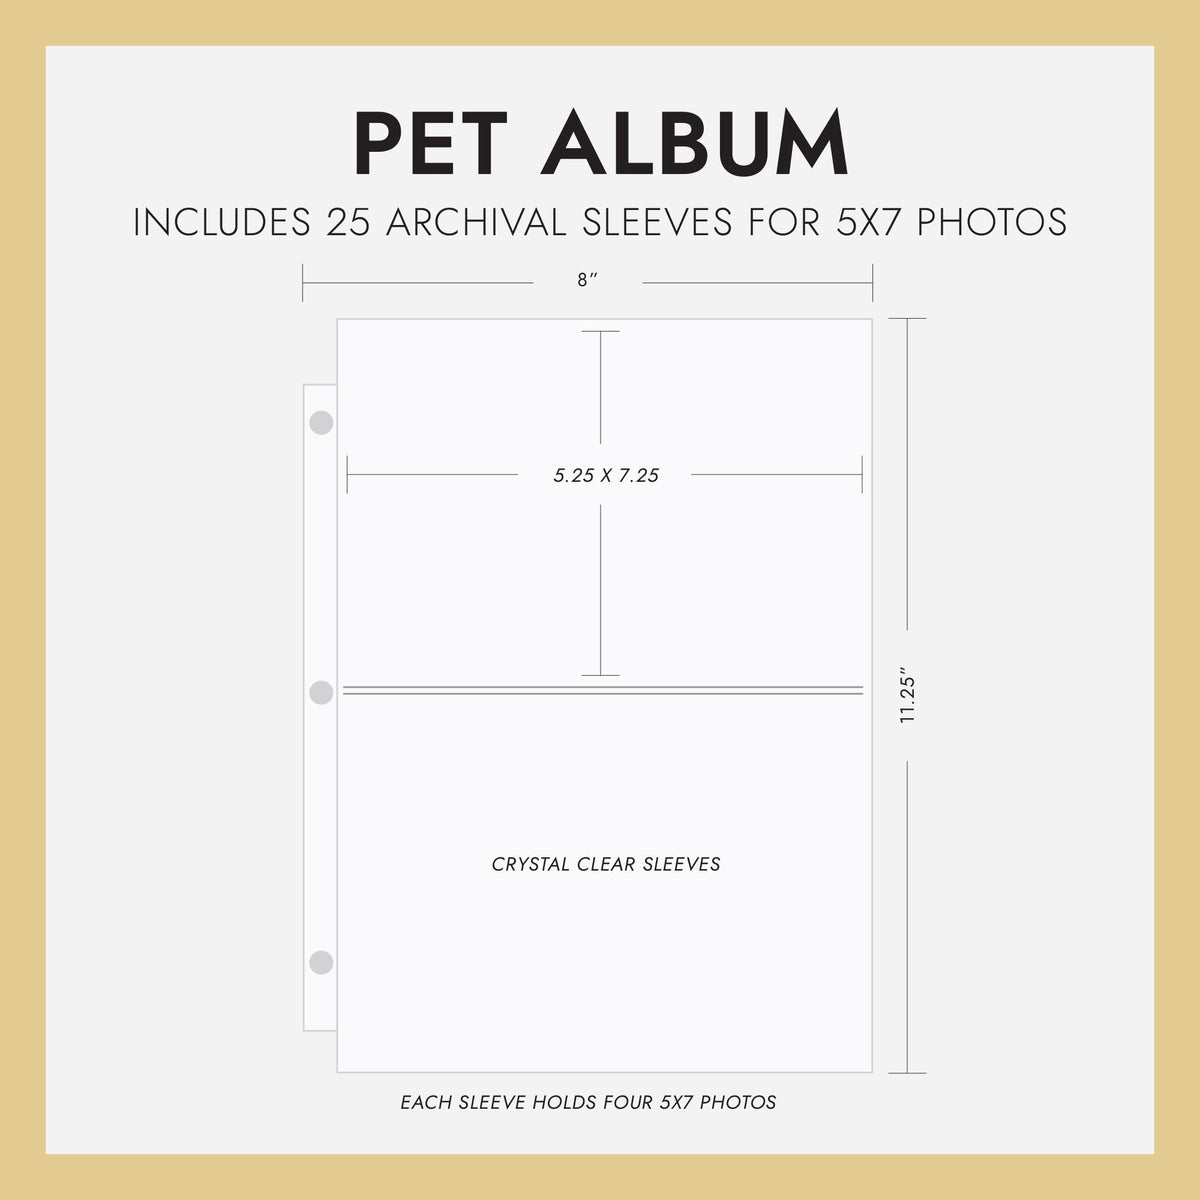 Pet Album with Natural Linen Cover